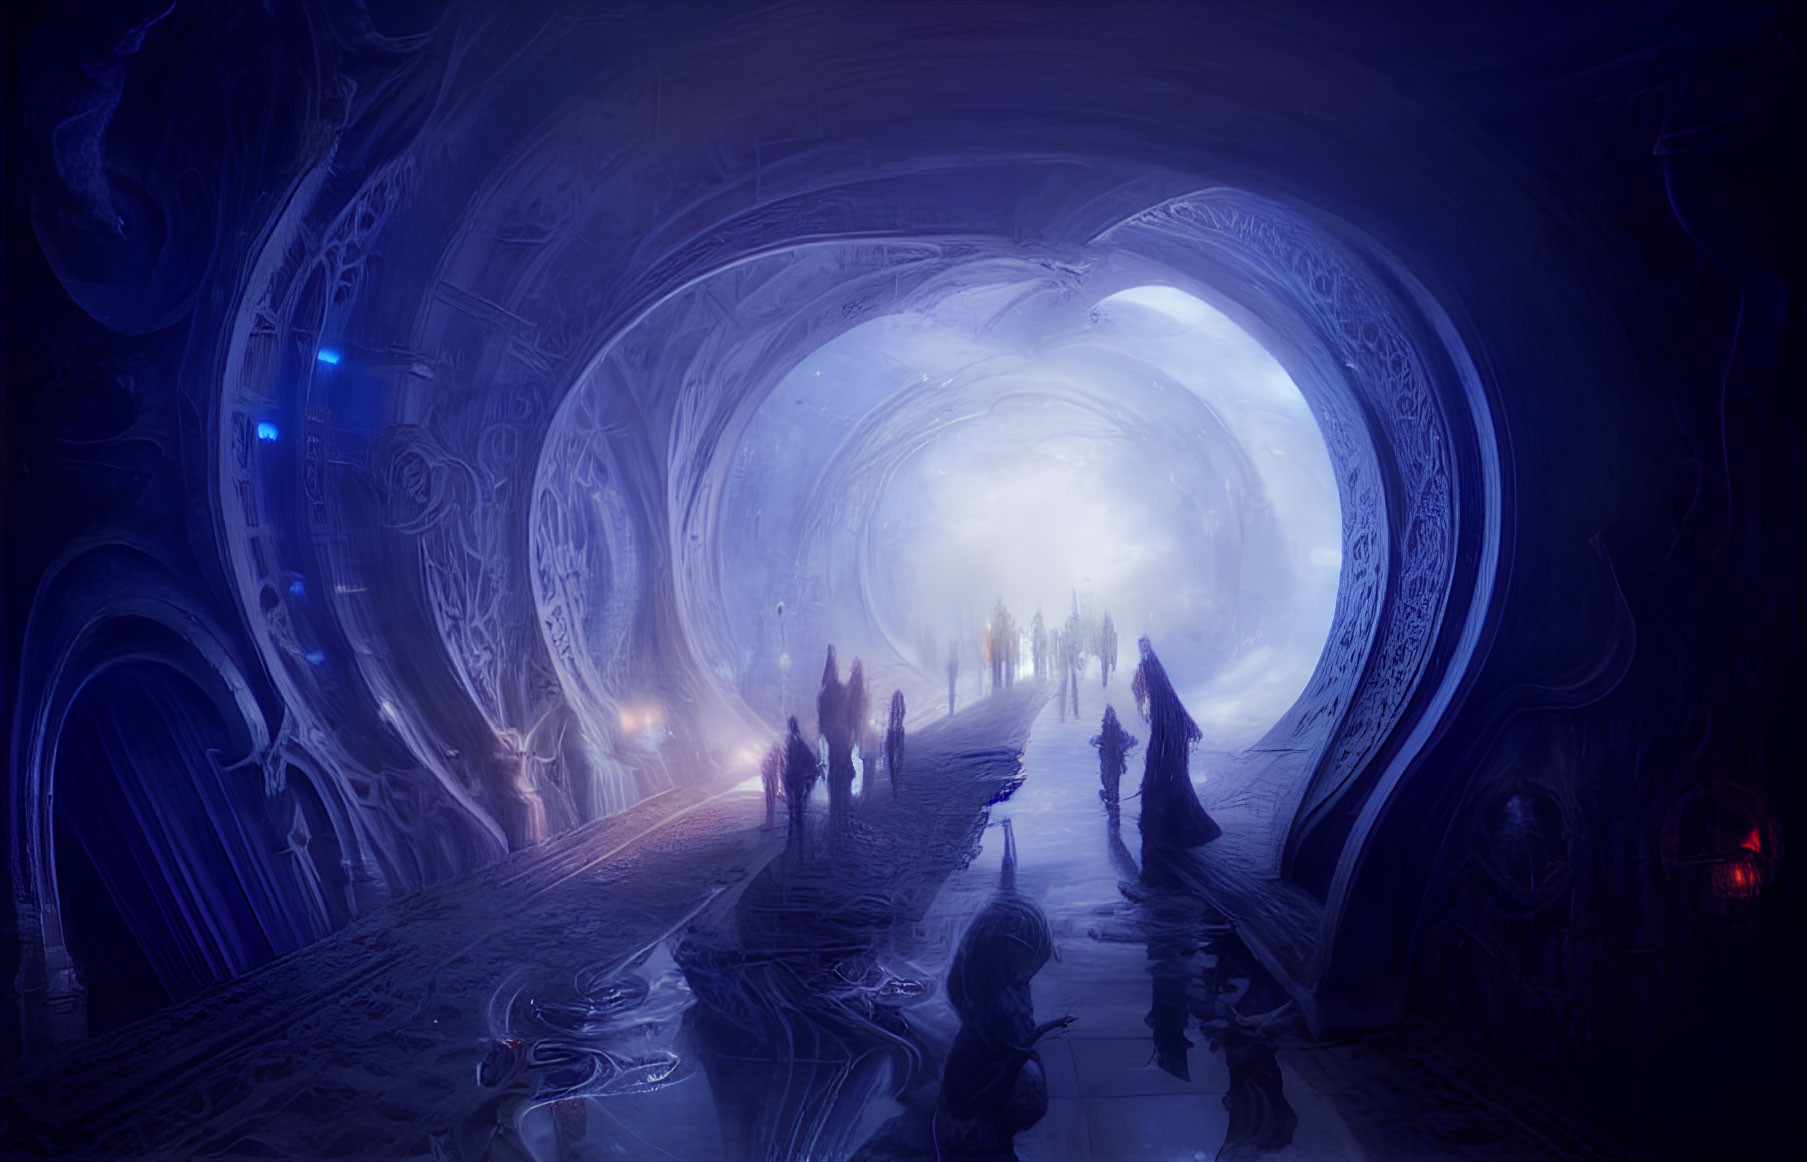 Mystical cavern with shadowy figures and snowy landscape